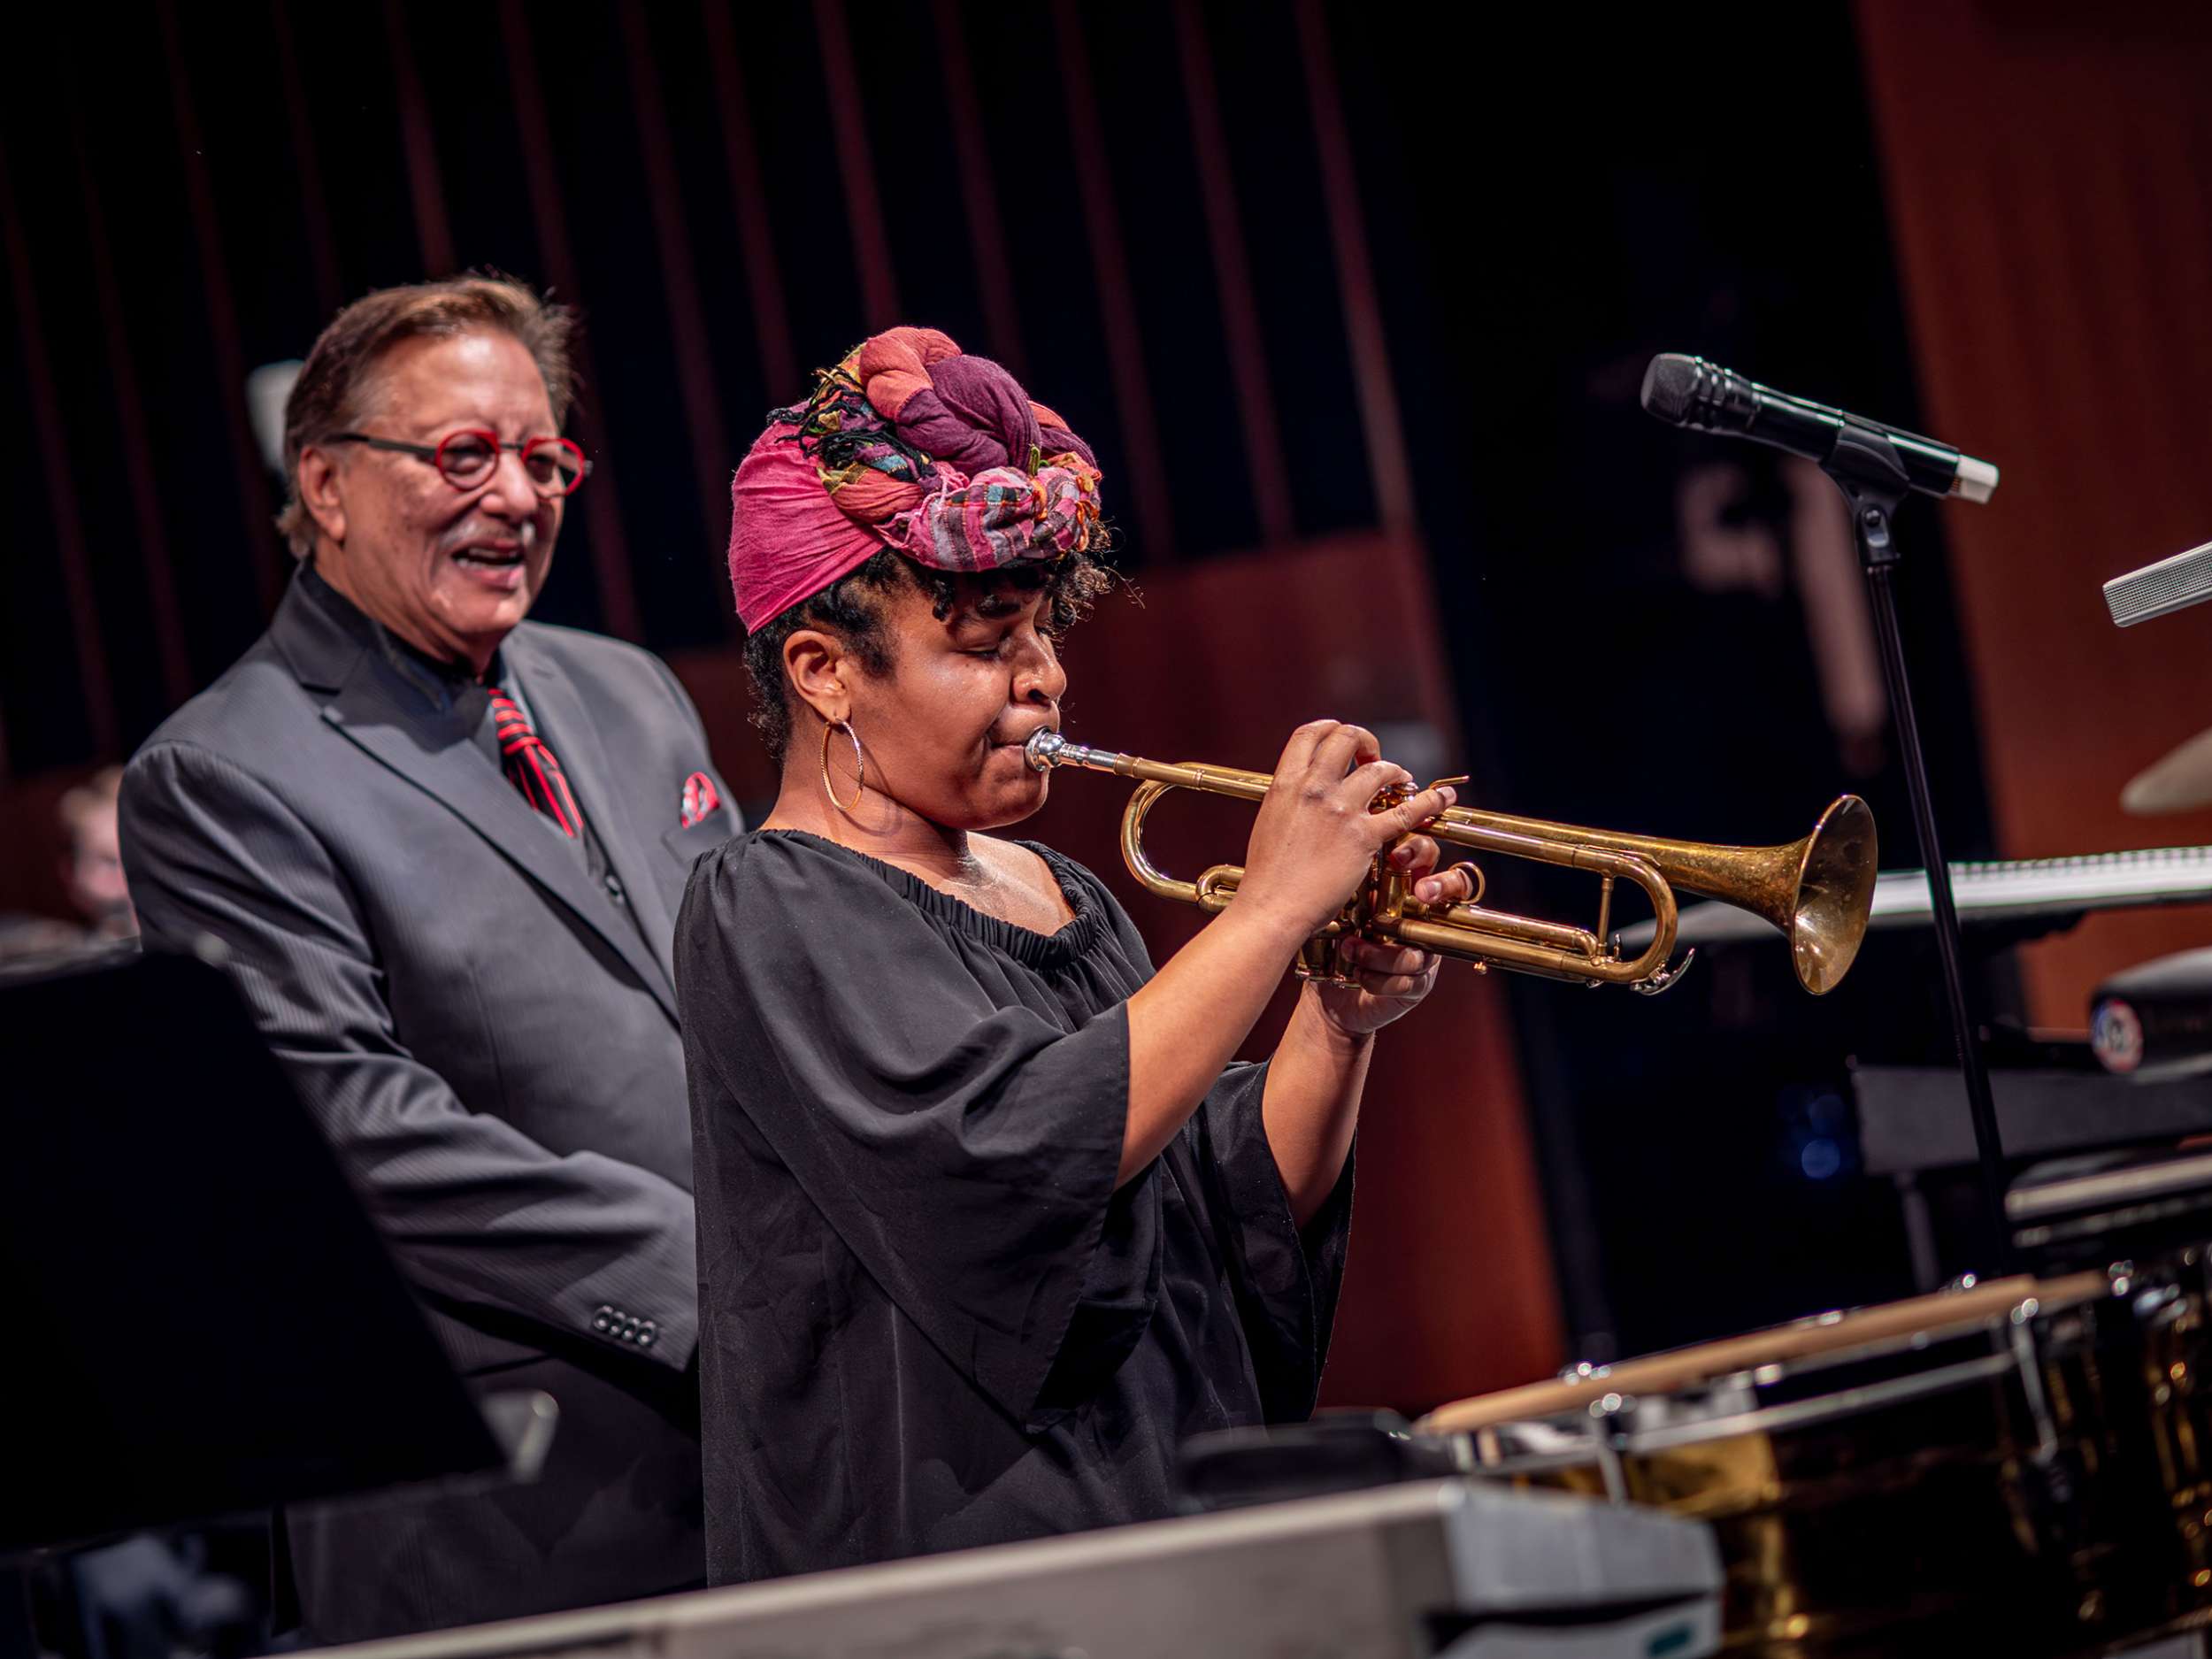 A woman wearing a colorful headscarf plays trumpet as Arturo Sandoval smiles behind her.